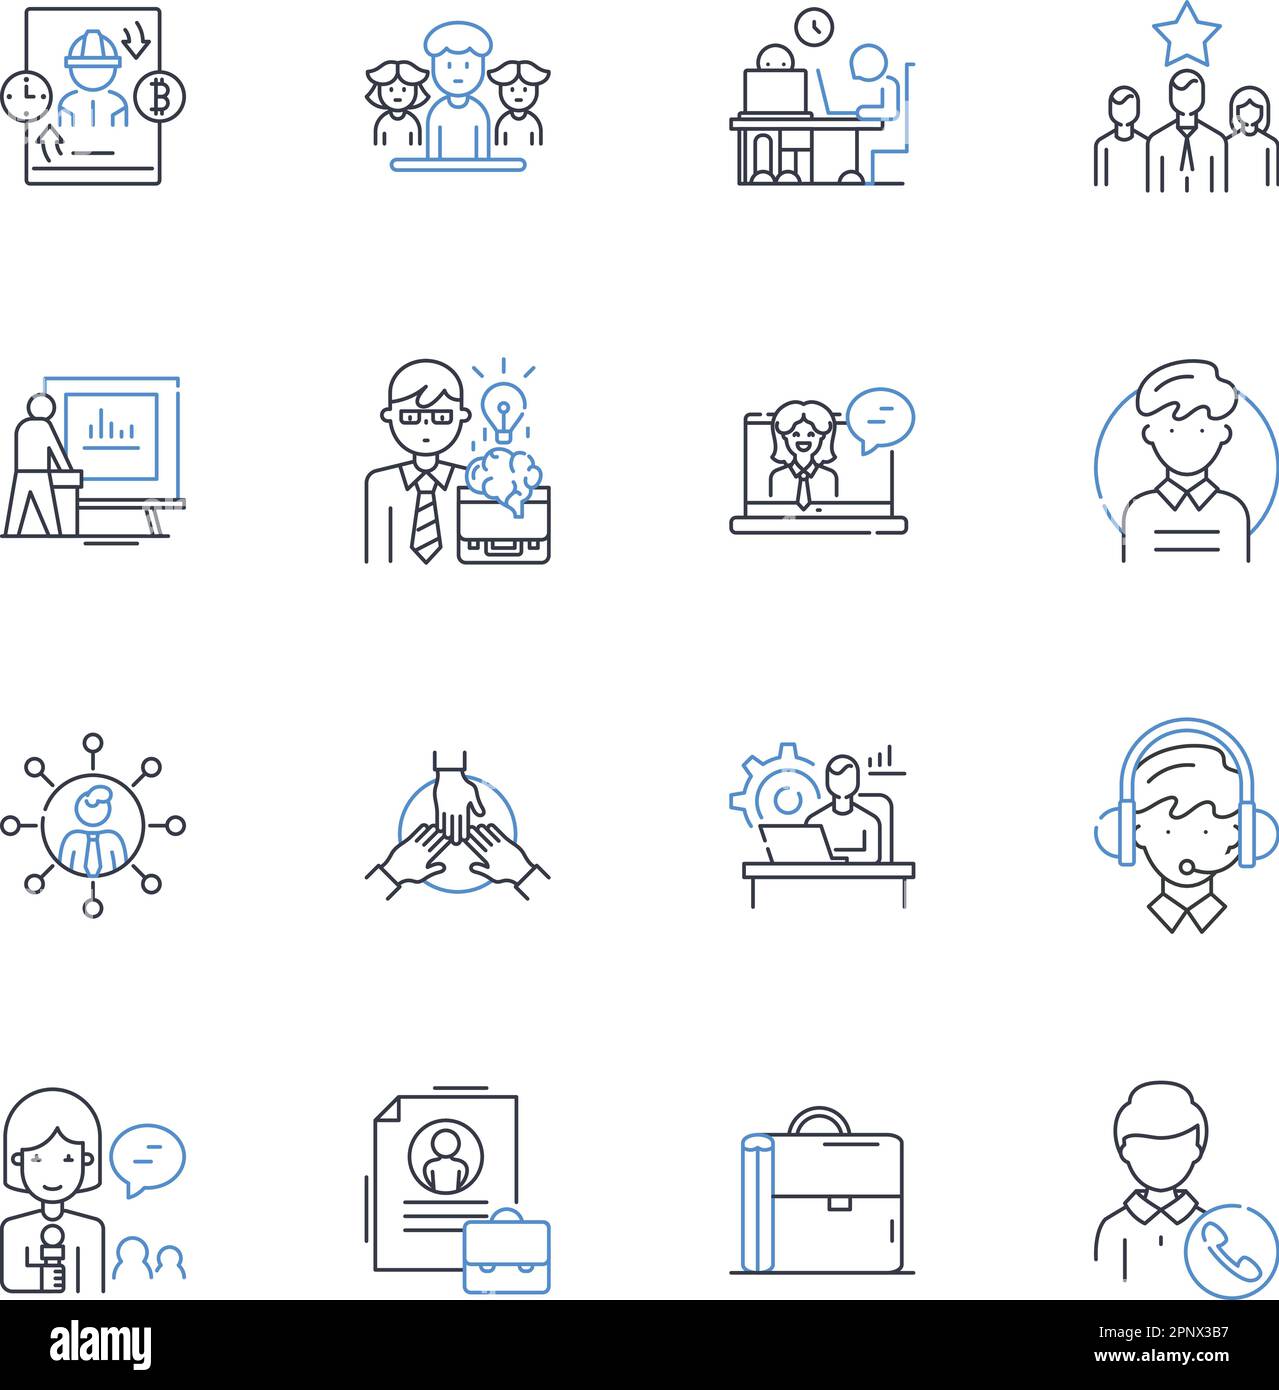 Service responsibilities line icons collection. Maintenance, Repairs, Cleaning, Inspections, Upgrades, Troubleshooting, Installations vector and Stock Vector